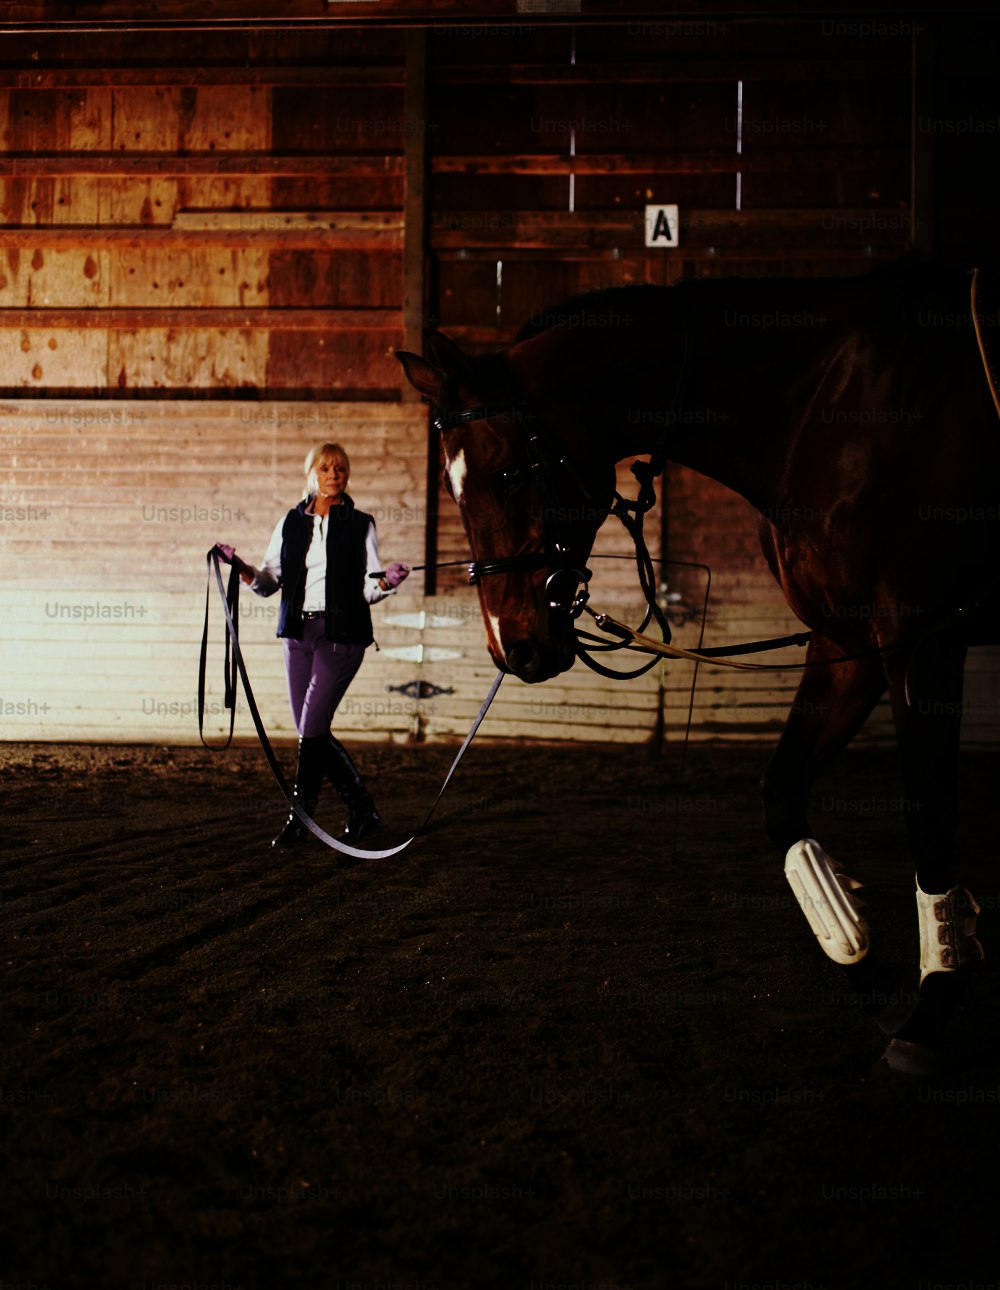 a woman leading a horse in an indoor arena